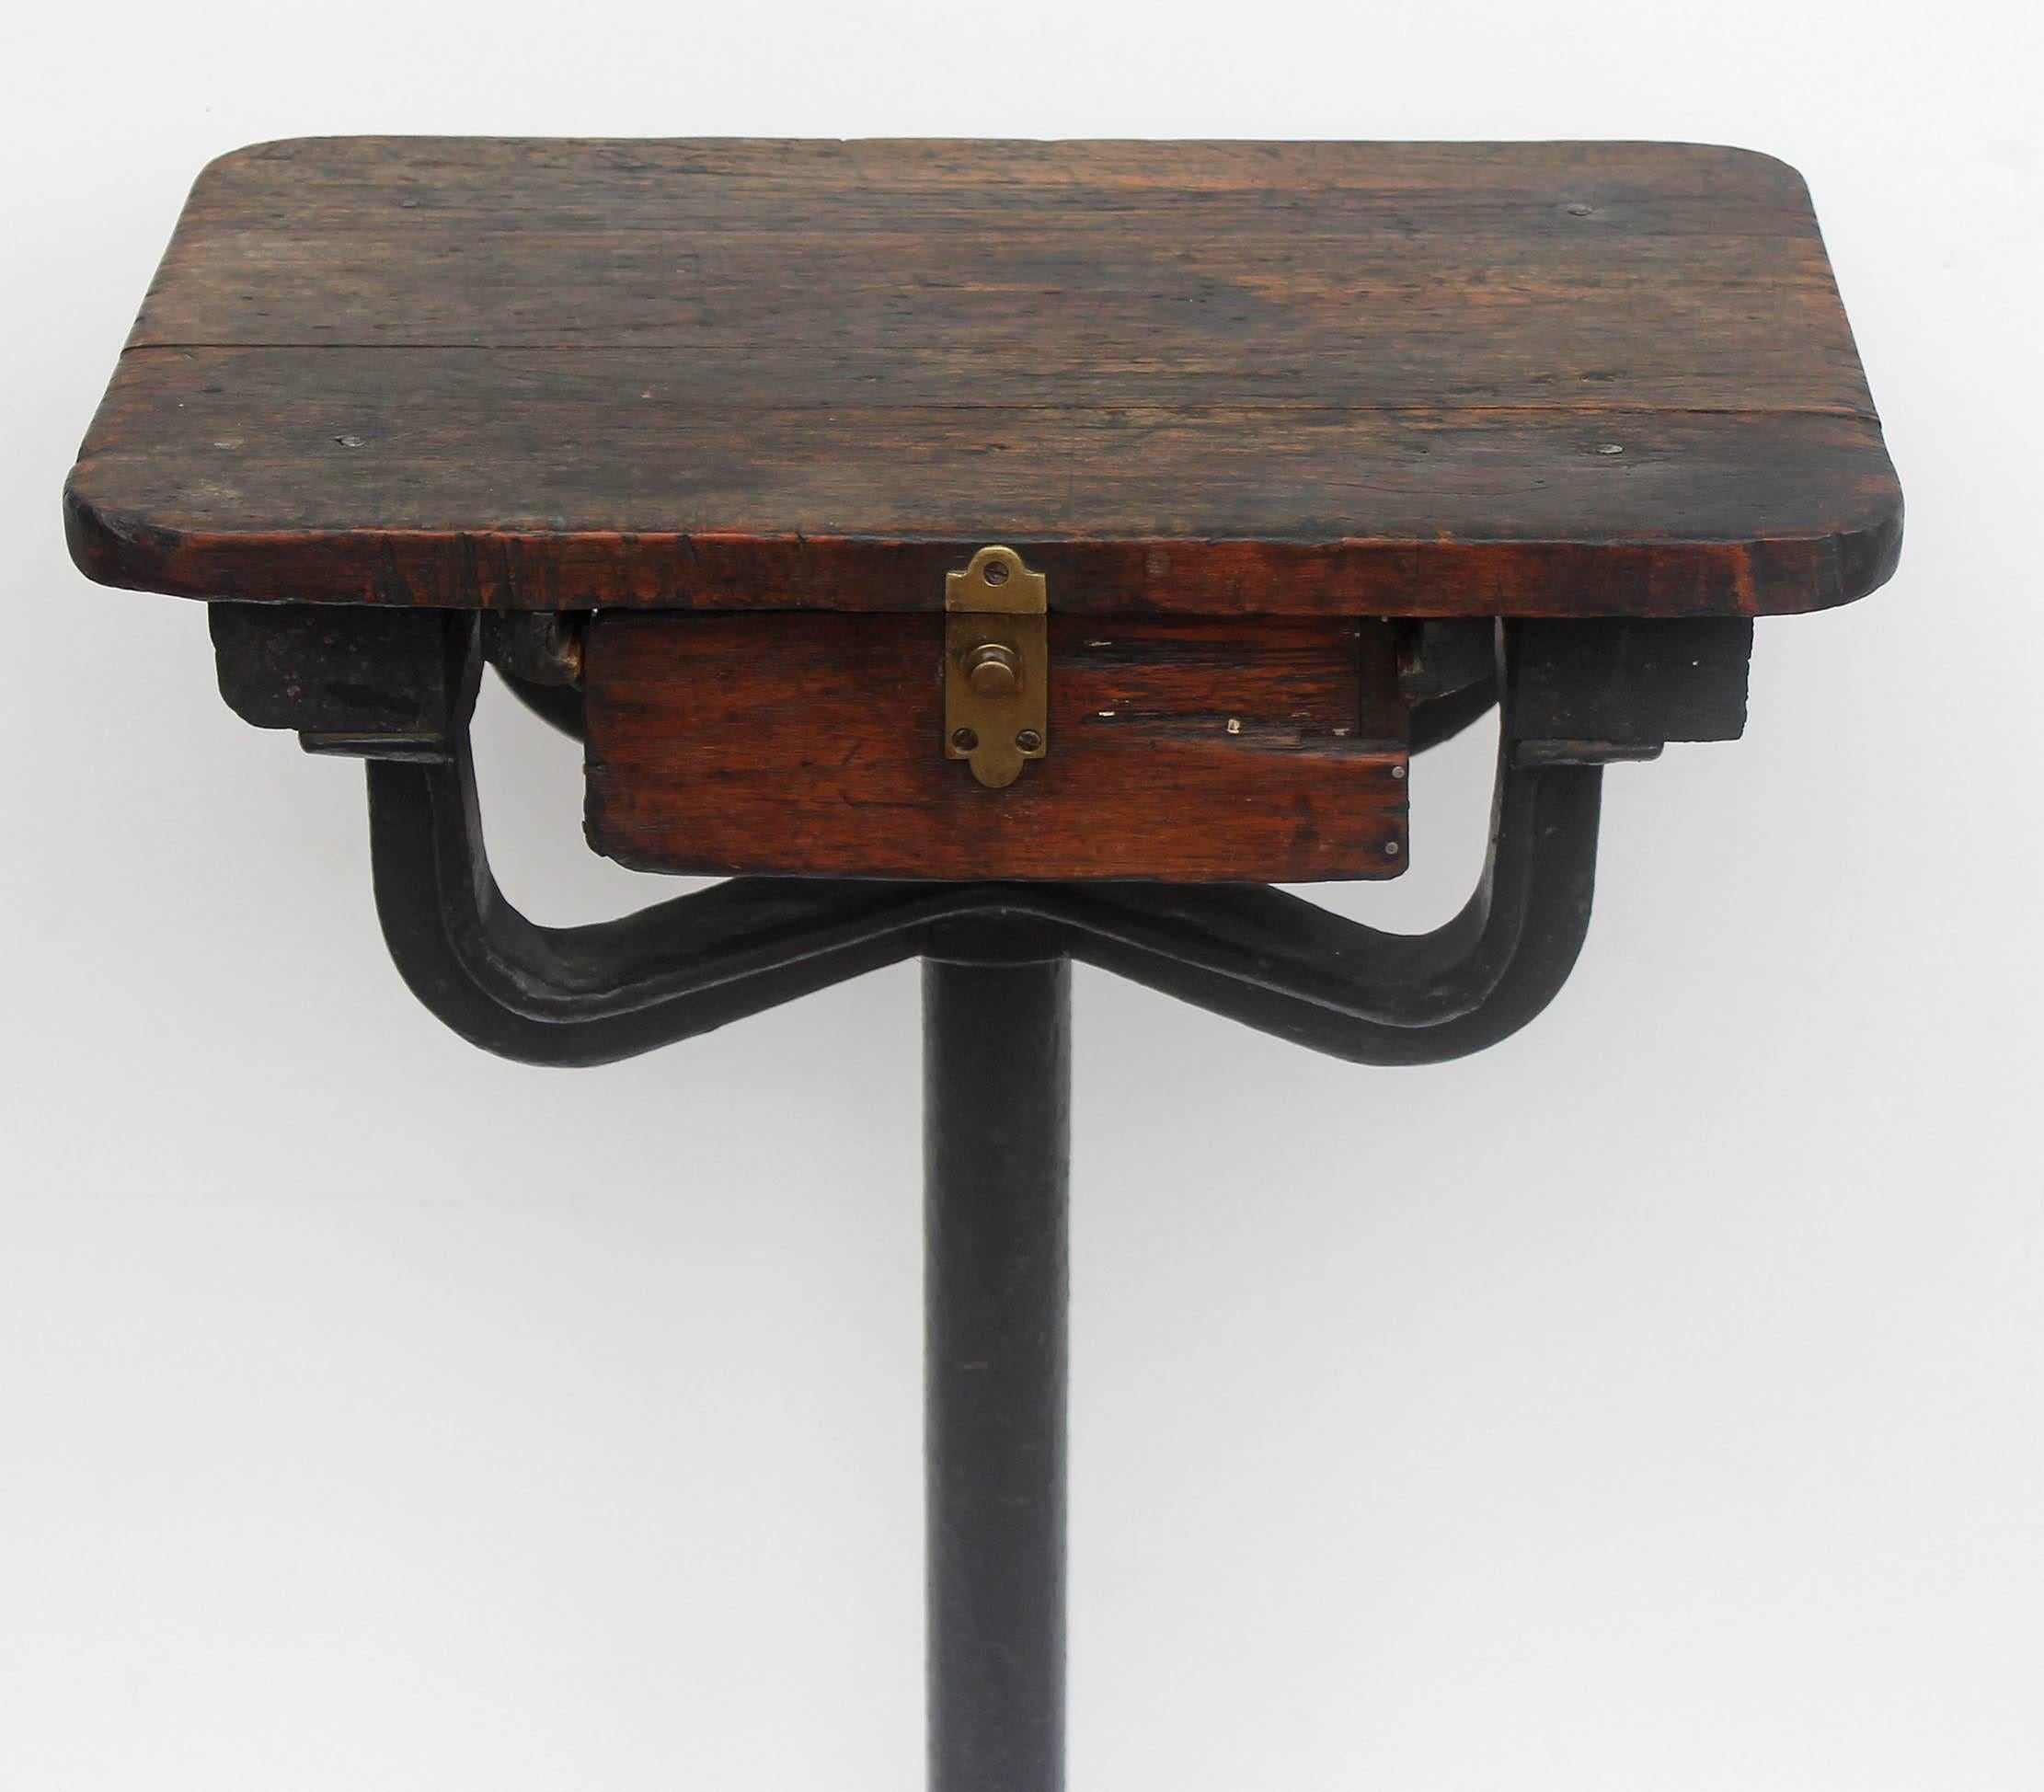 Antique tall Industrial one-drawer stand, podium, or pedestal. Cast iron base. Nice old patina, circa 1900.